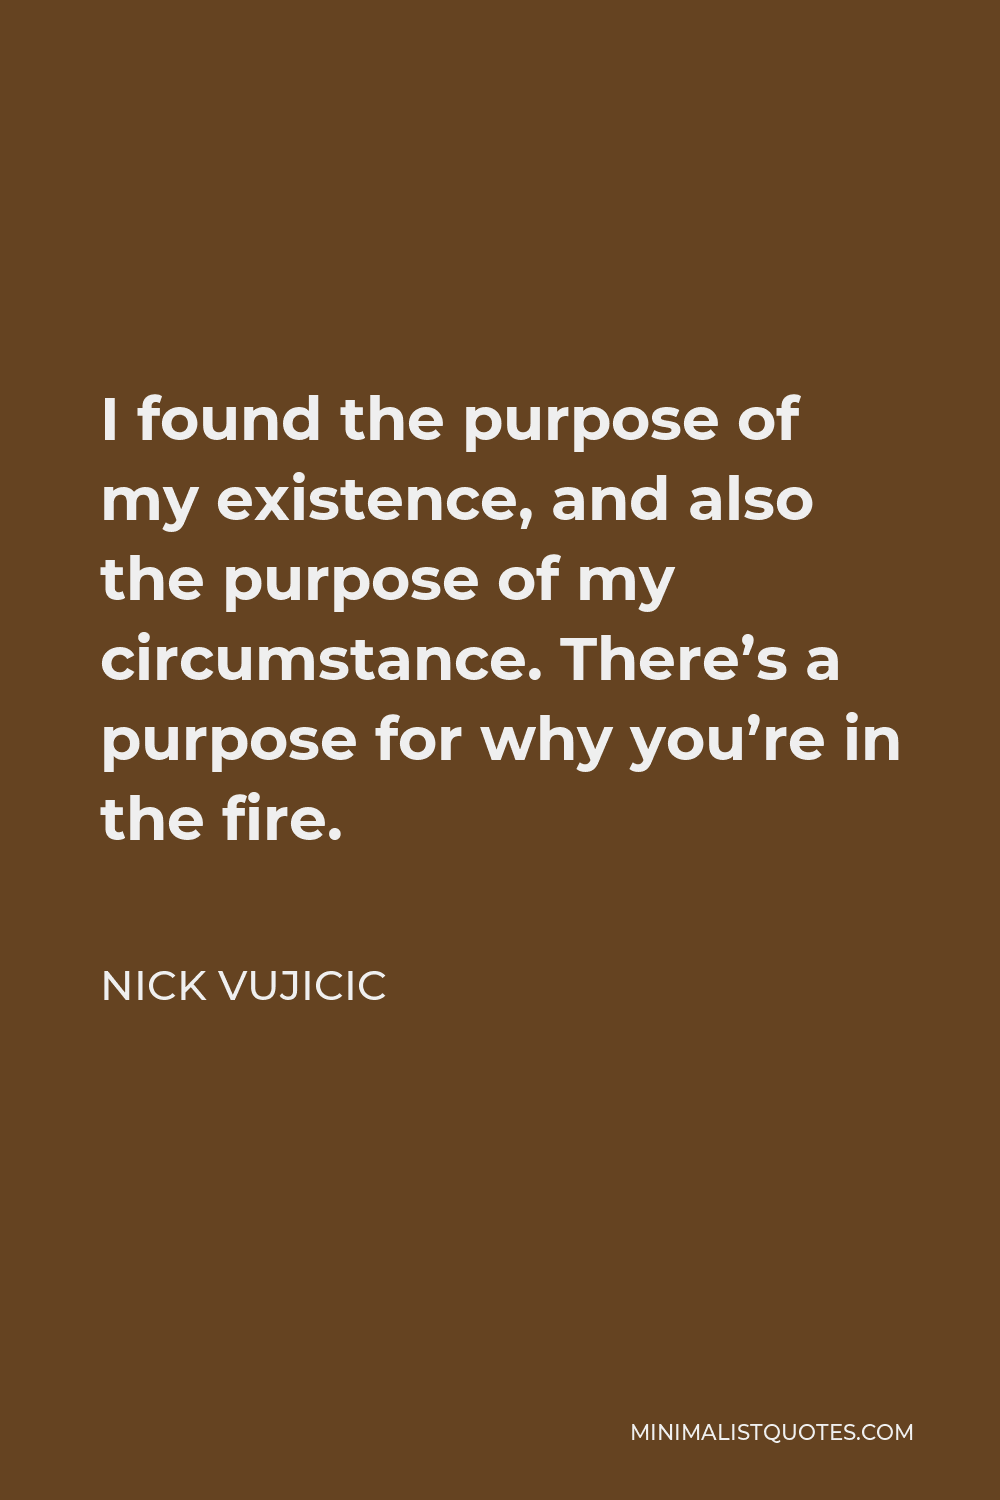 Nick Vujicic Quote - I found the purpose of my existence, and also the purpose of my circumstance. There’s a purpose for why you’re in the fire.